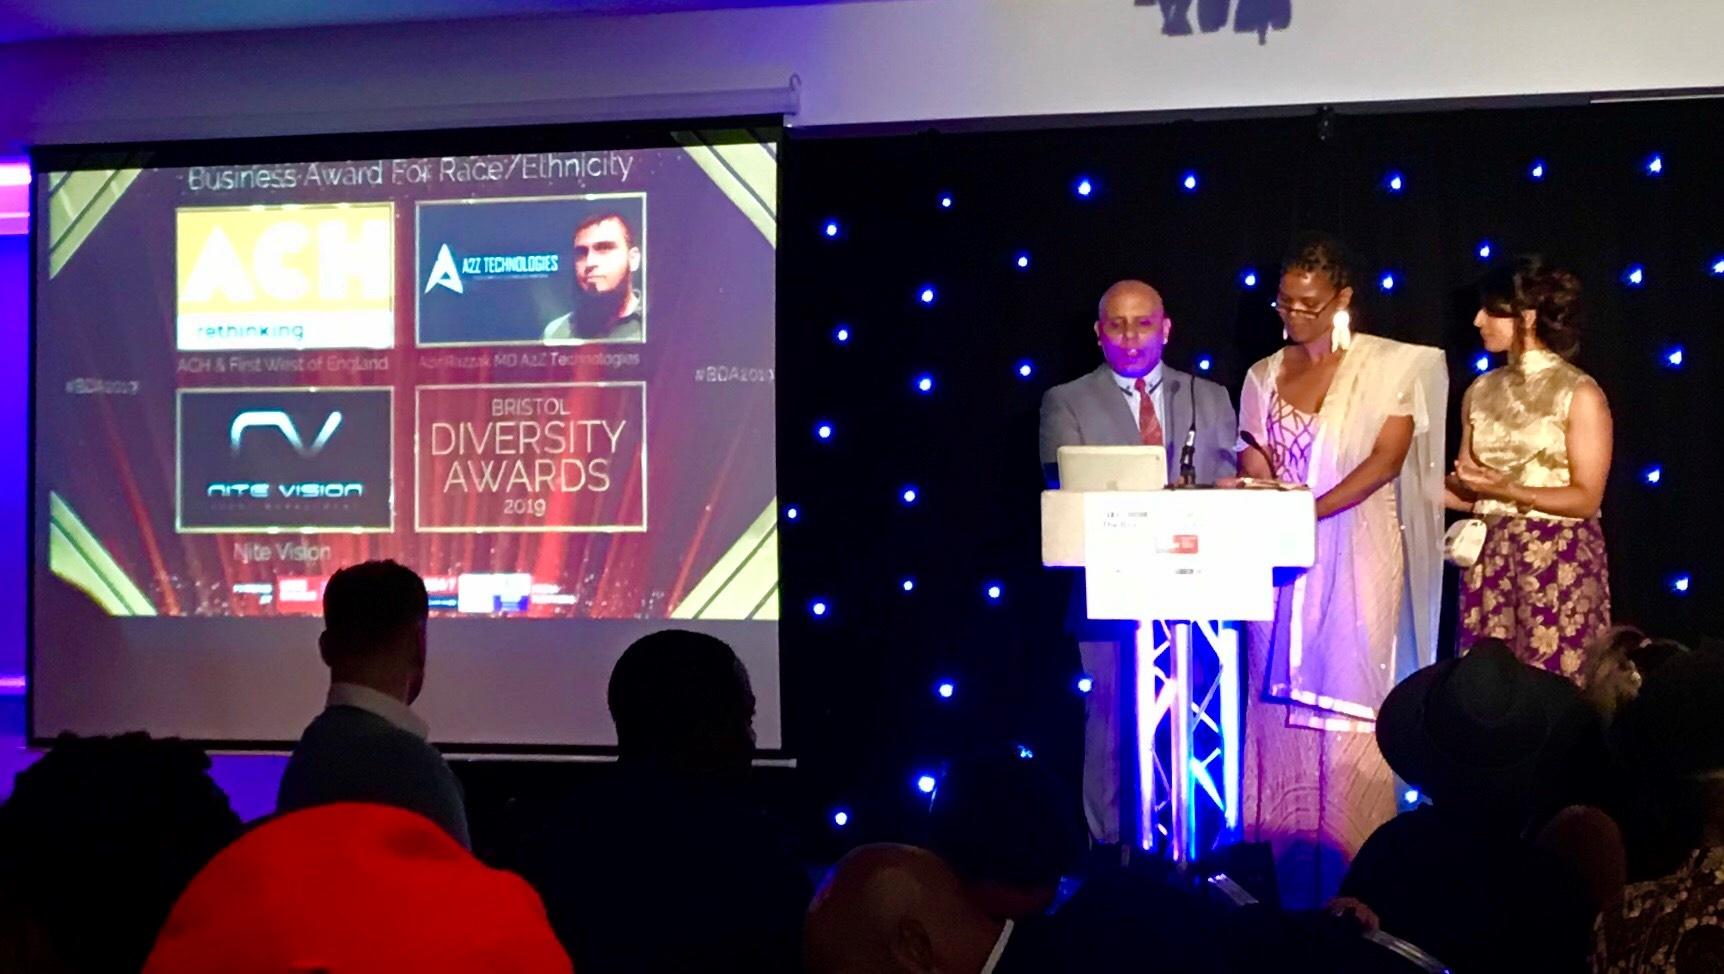 ACH shortlisted for the Business Award for Race/Ethnicity at the Bristol Diversity Awards